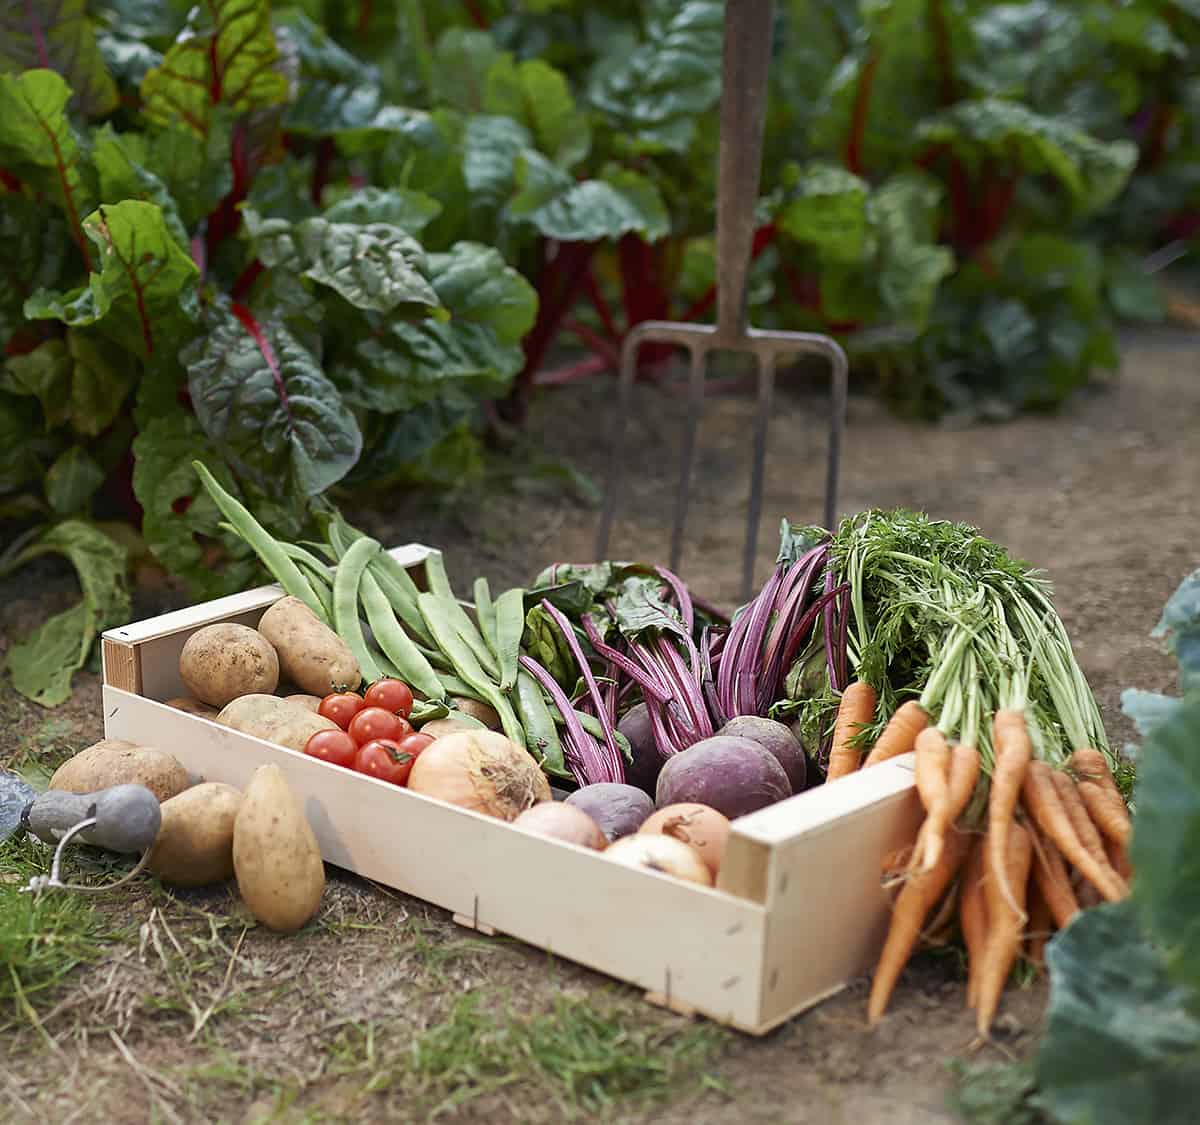 What Are The Best Veggies to Plant in July?